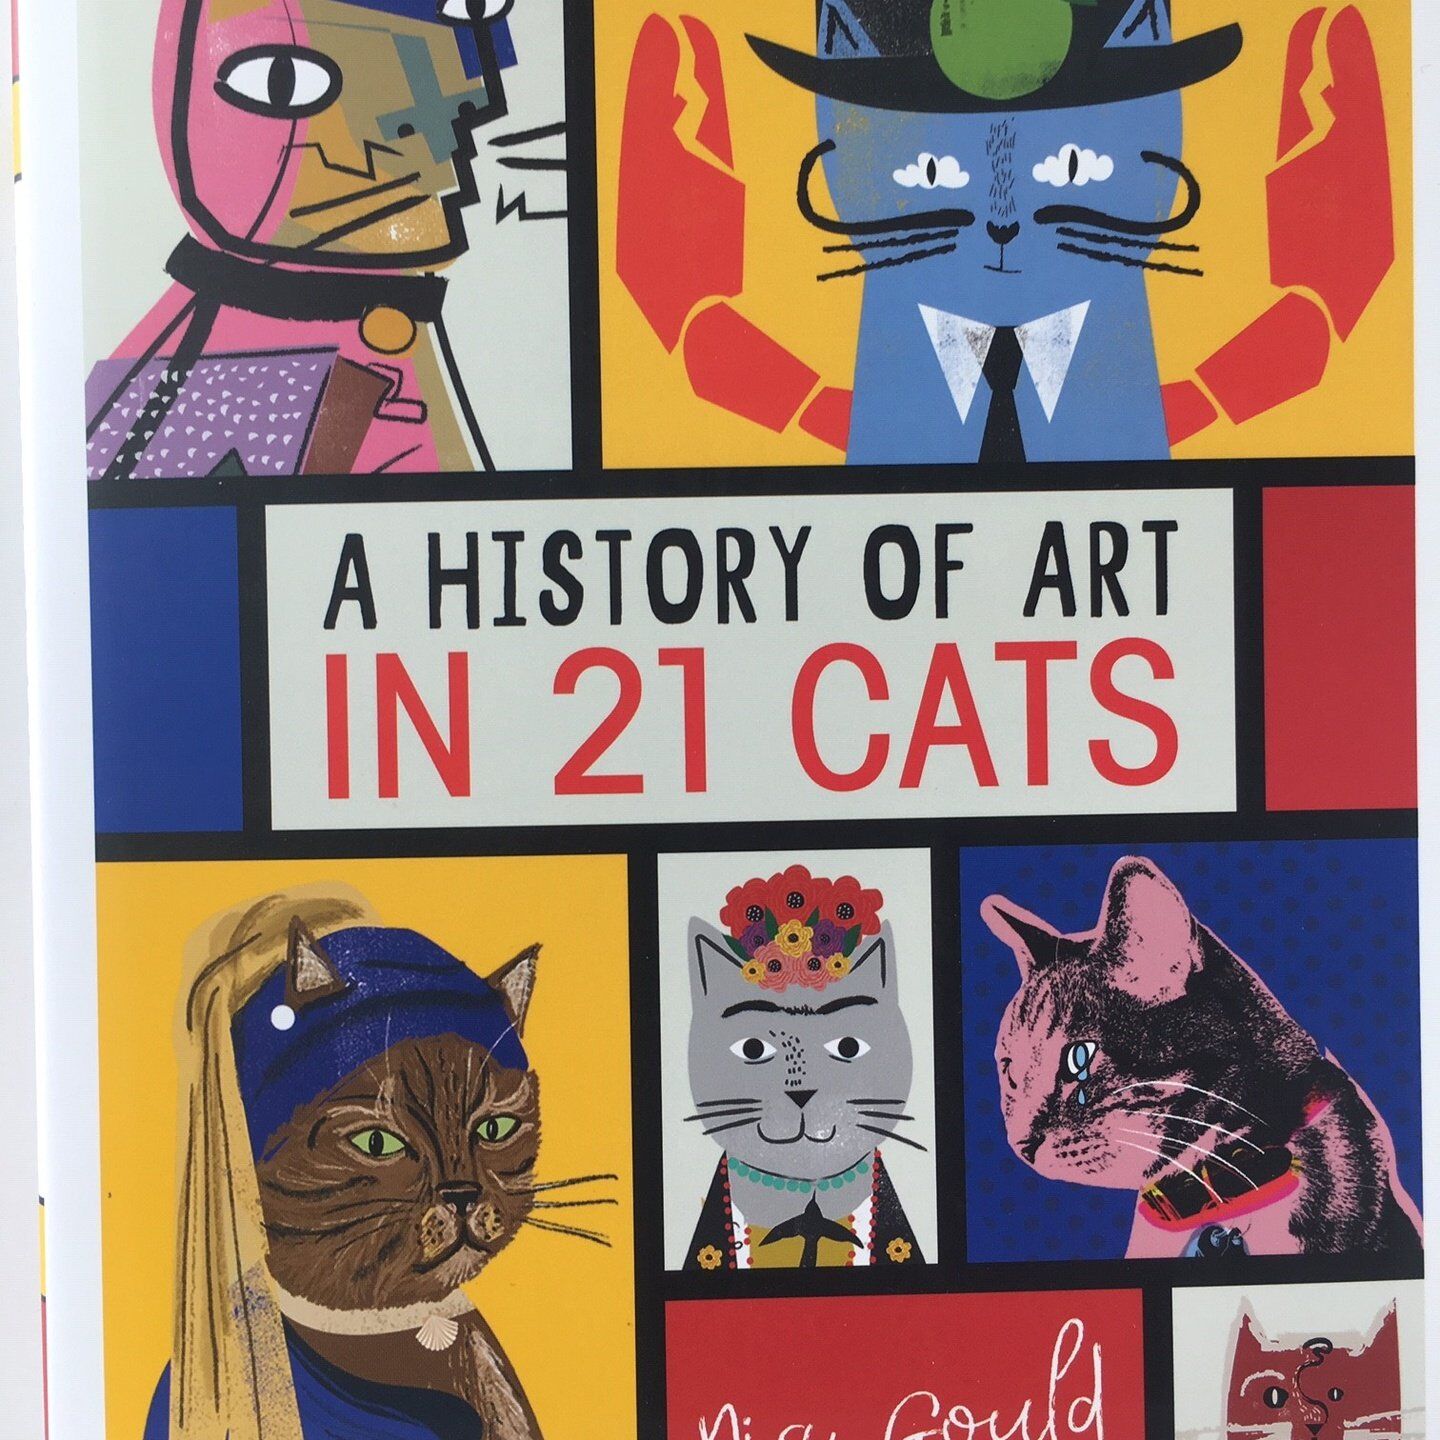 Book: A History of Art in 21 Cats